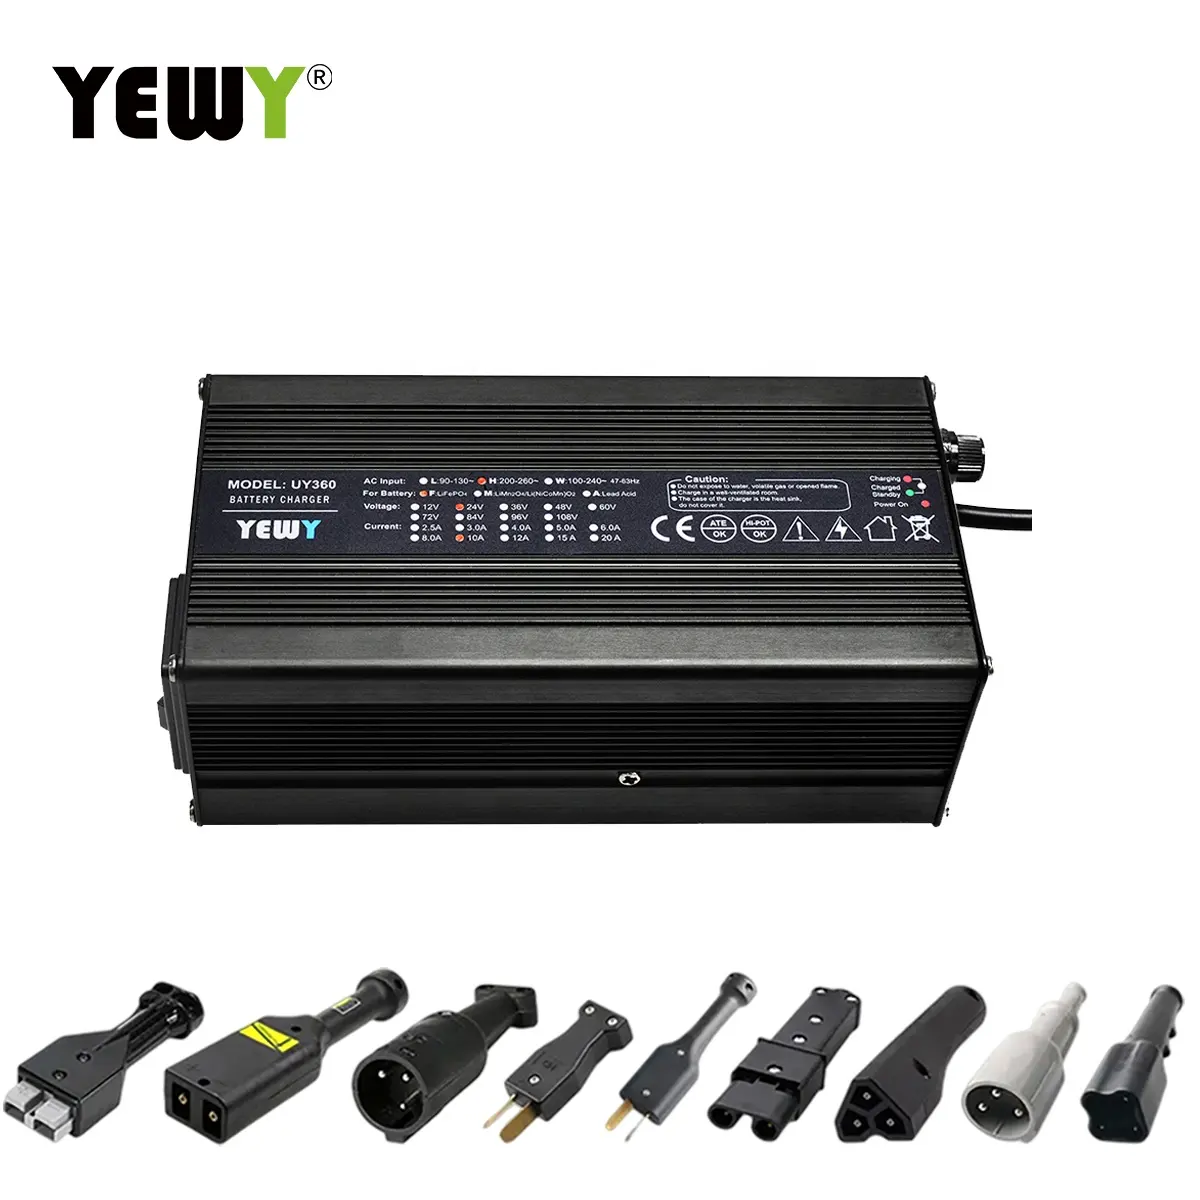 YEWY UY360 48v 5a 6a Lead Acid/Li Ion Battery Charger For Aluminum Electronic Power Wheelchair Ebike/Scooter/Golf Cart